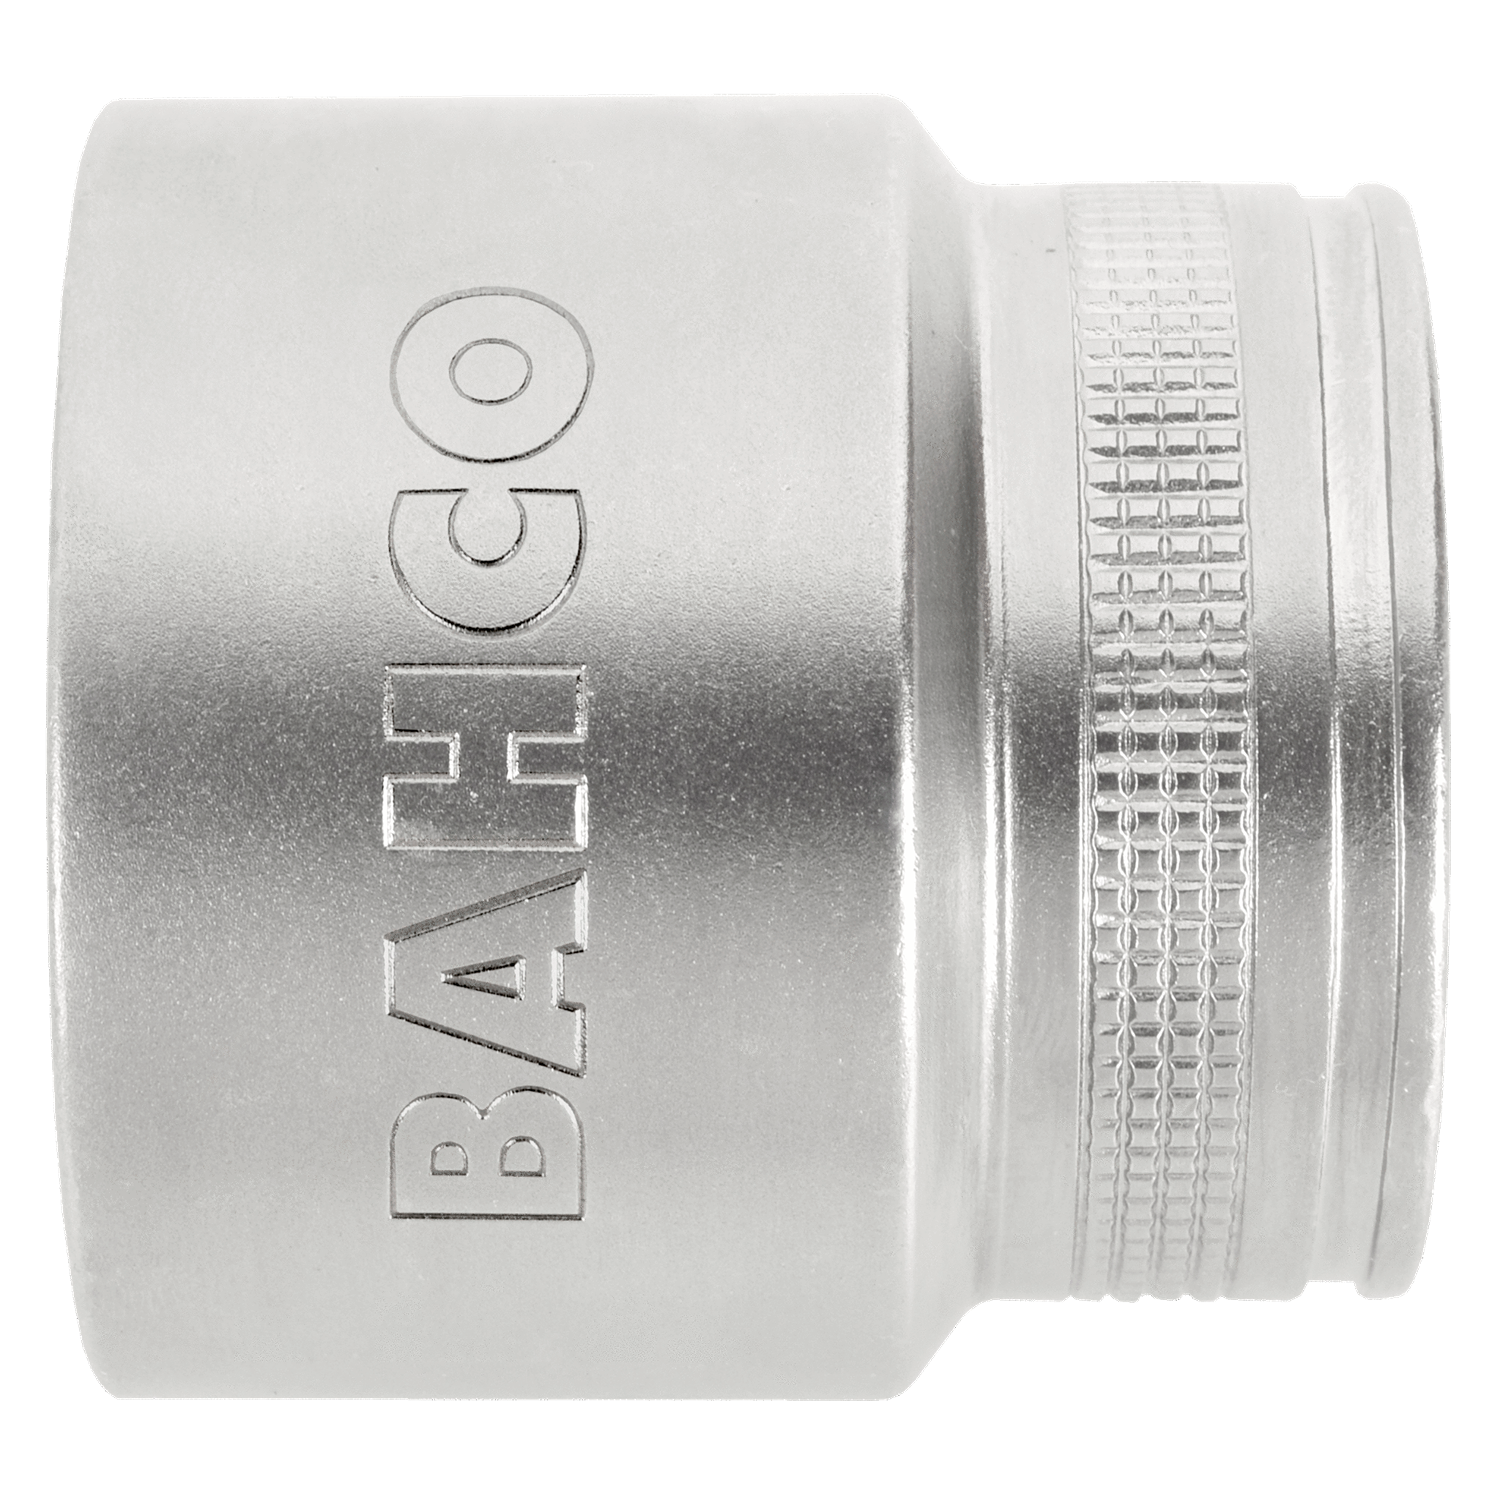 BAHCO 7800SM 1/2" Square Drive Socket With Metric Hex Profile - Premium Square Drive Socket from BAHCO - Shop now at Yew Aik.